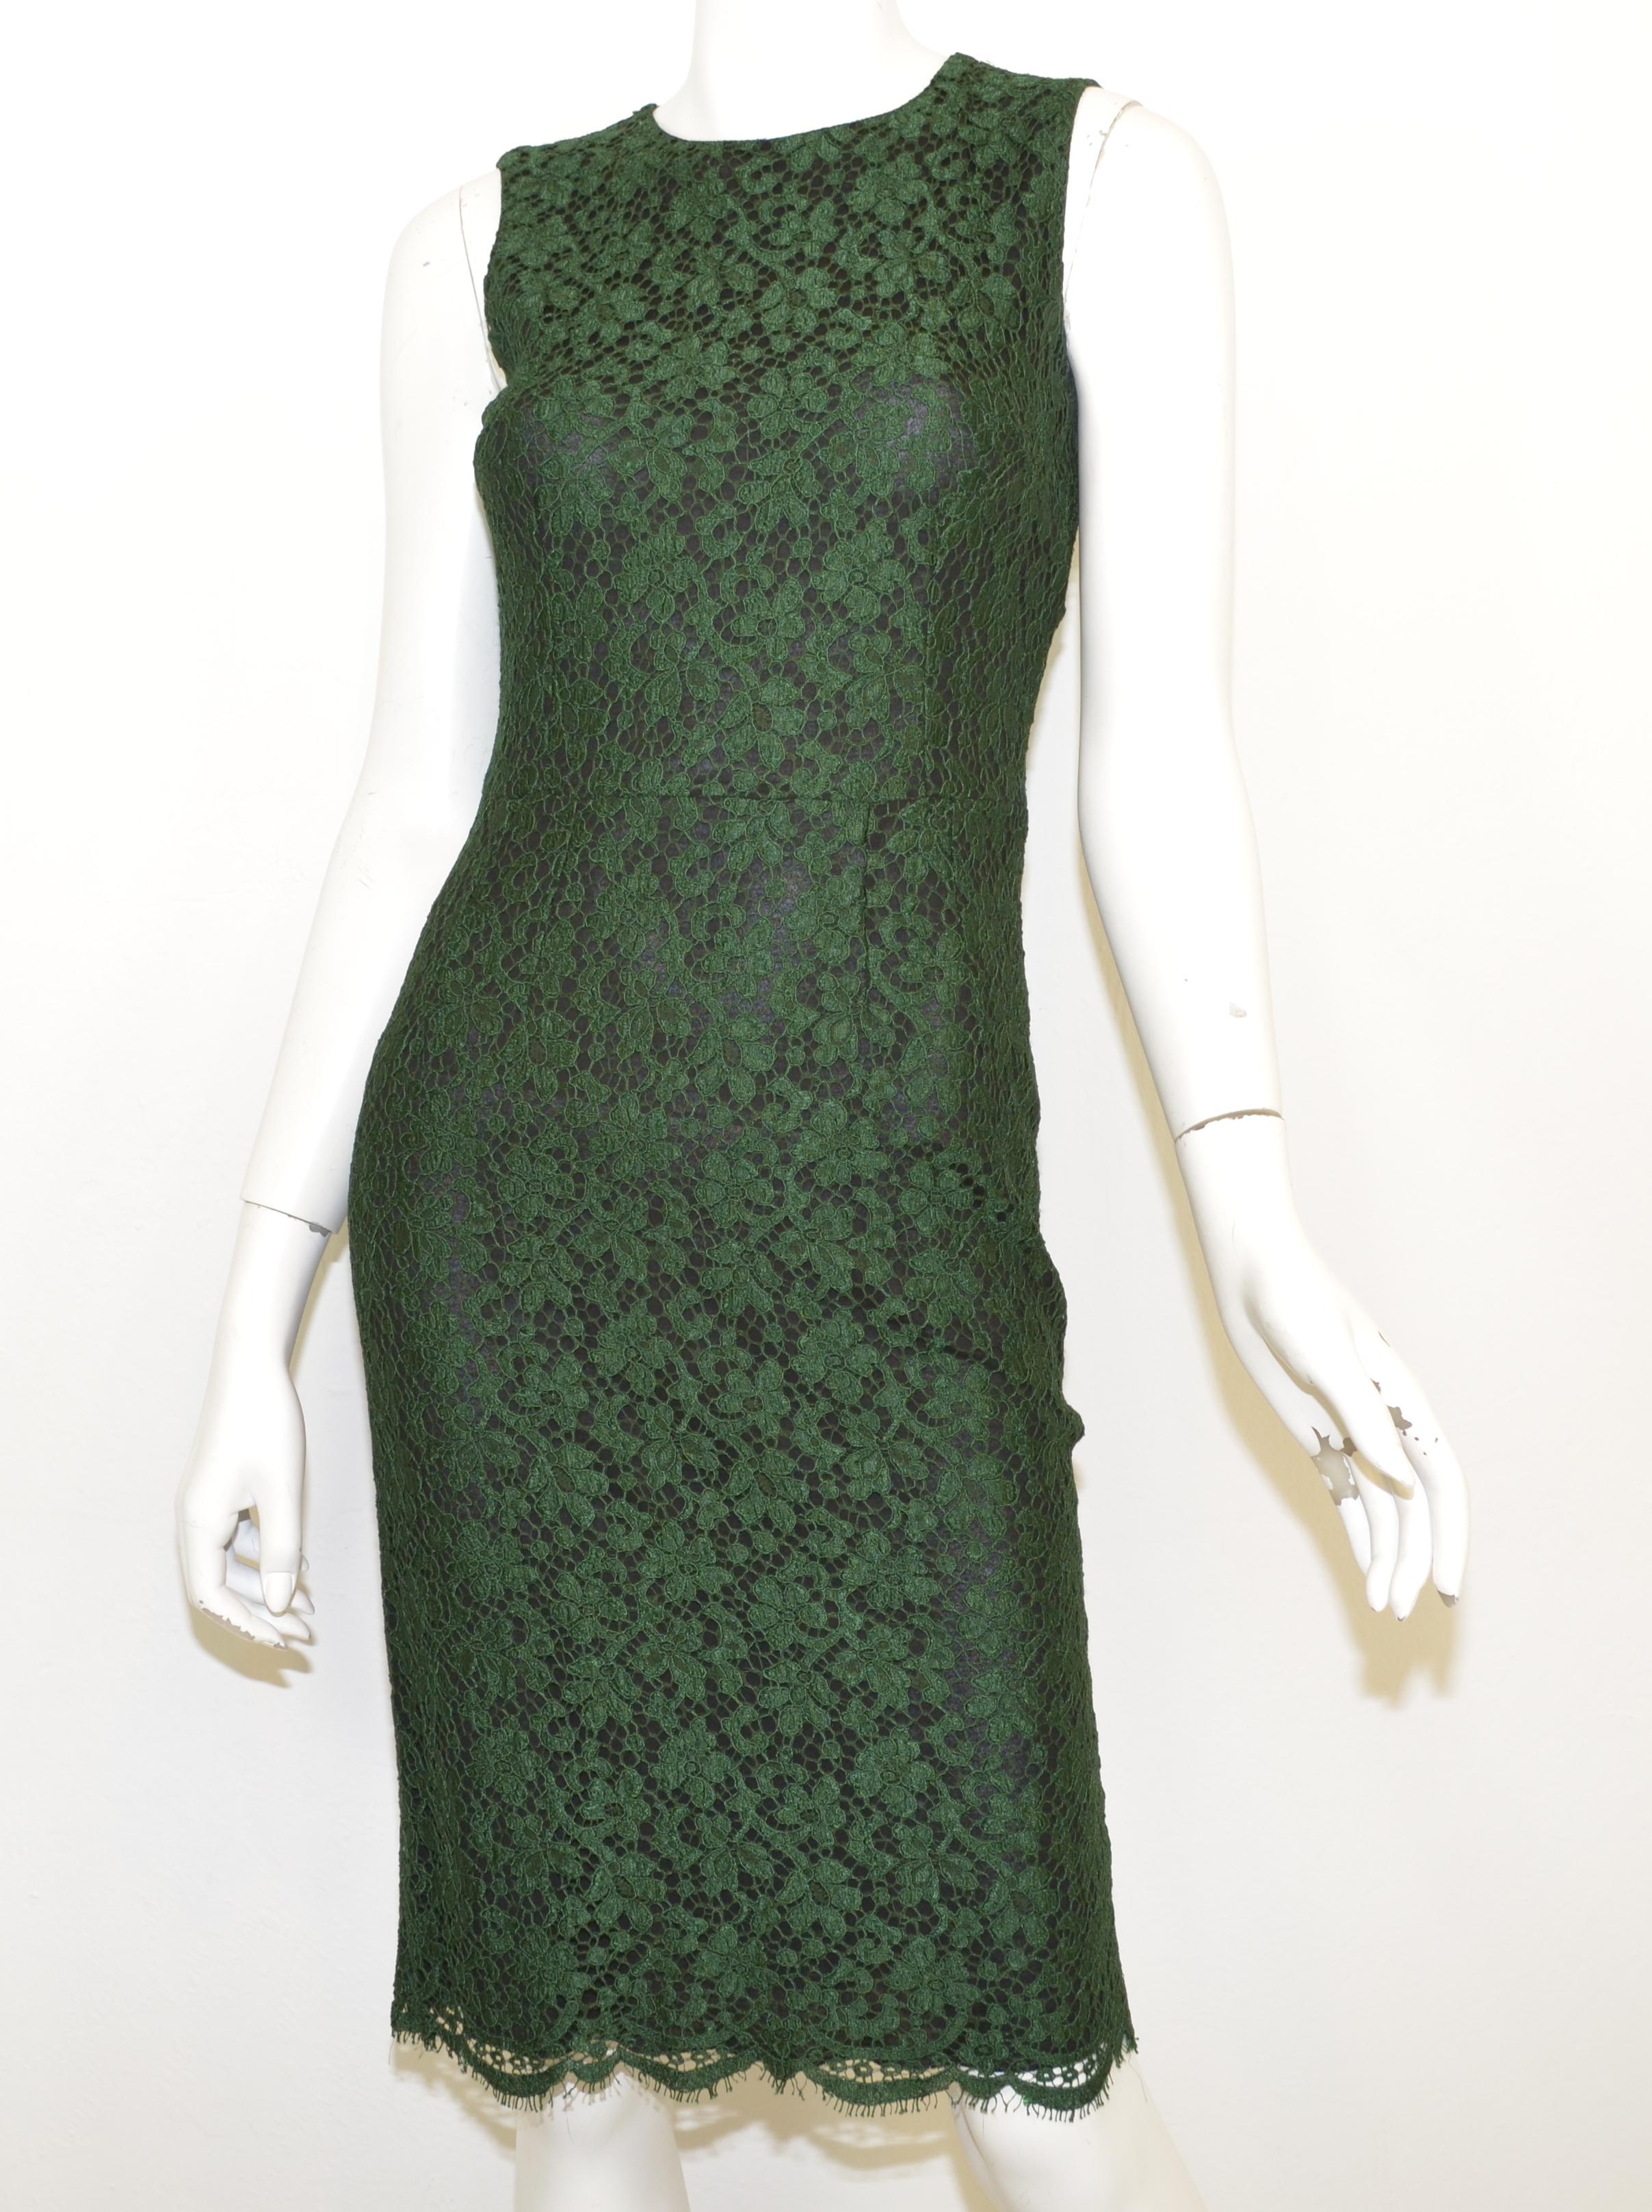 Dolce & Gabbana dress is featured in a deep green lace overlay with a black shell, back zipper fastening, and a scalloped hem. Dress is a size 38, made in Italy, composed with a cotton and nylon blend with a rayon shell.

Measurements:
Bust 32'',